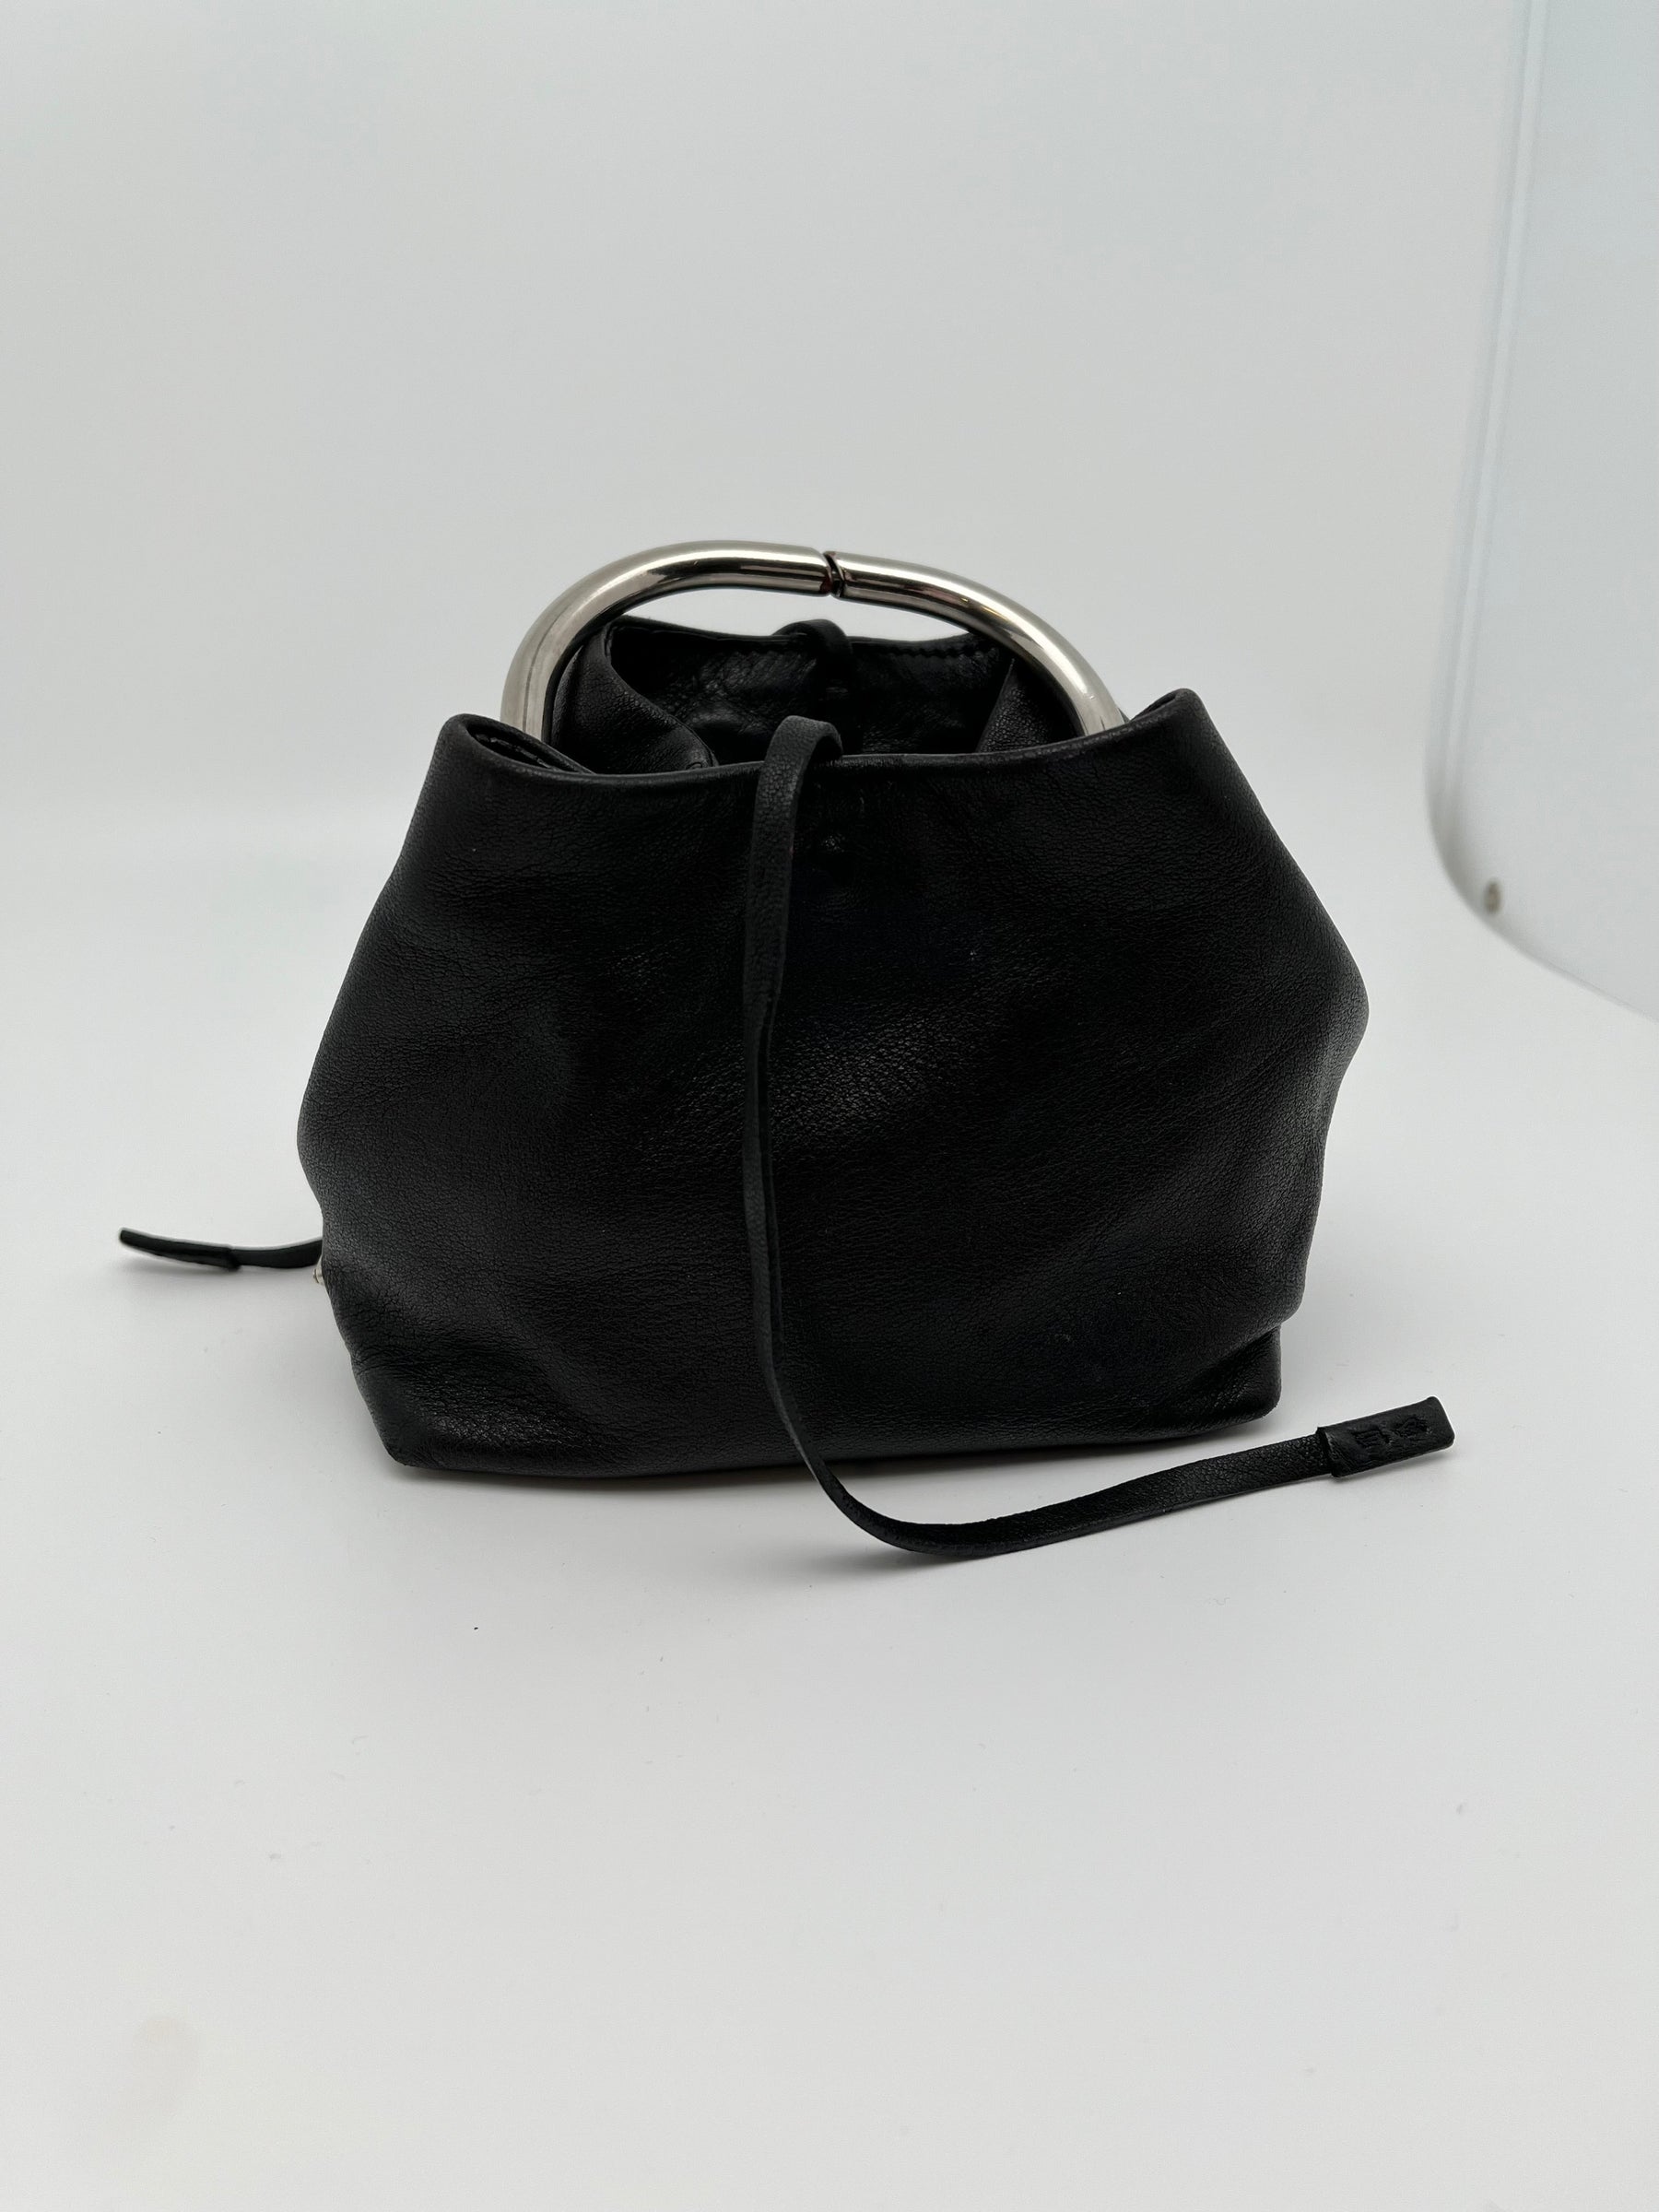 Prada Black Leather O-Ring Mini Top Handle Bag | Silver Tone Hardware | Prada Plaque | Leather String Tie Closure | Yellow Moire Satin Lining | Zippered Interior Pocket | Great Condition